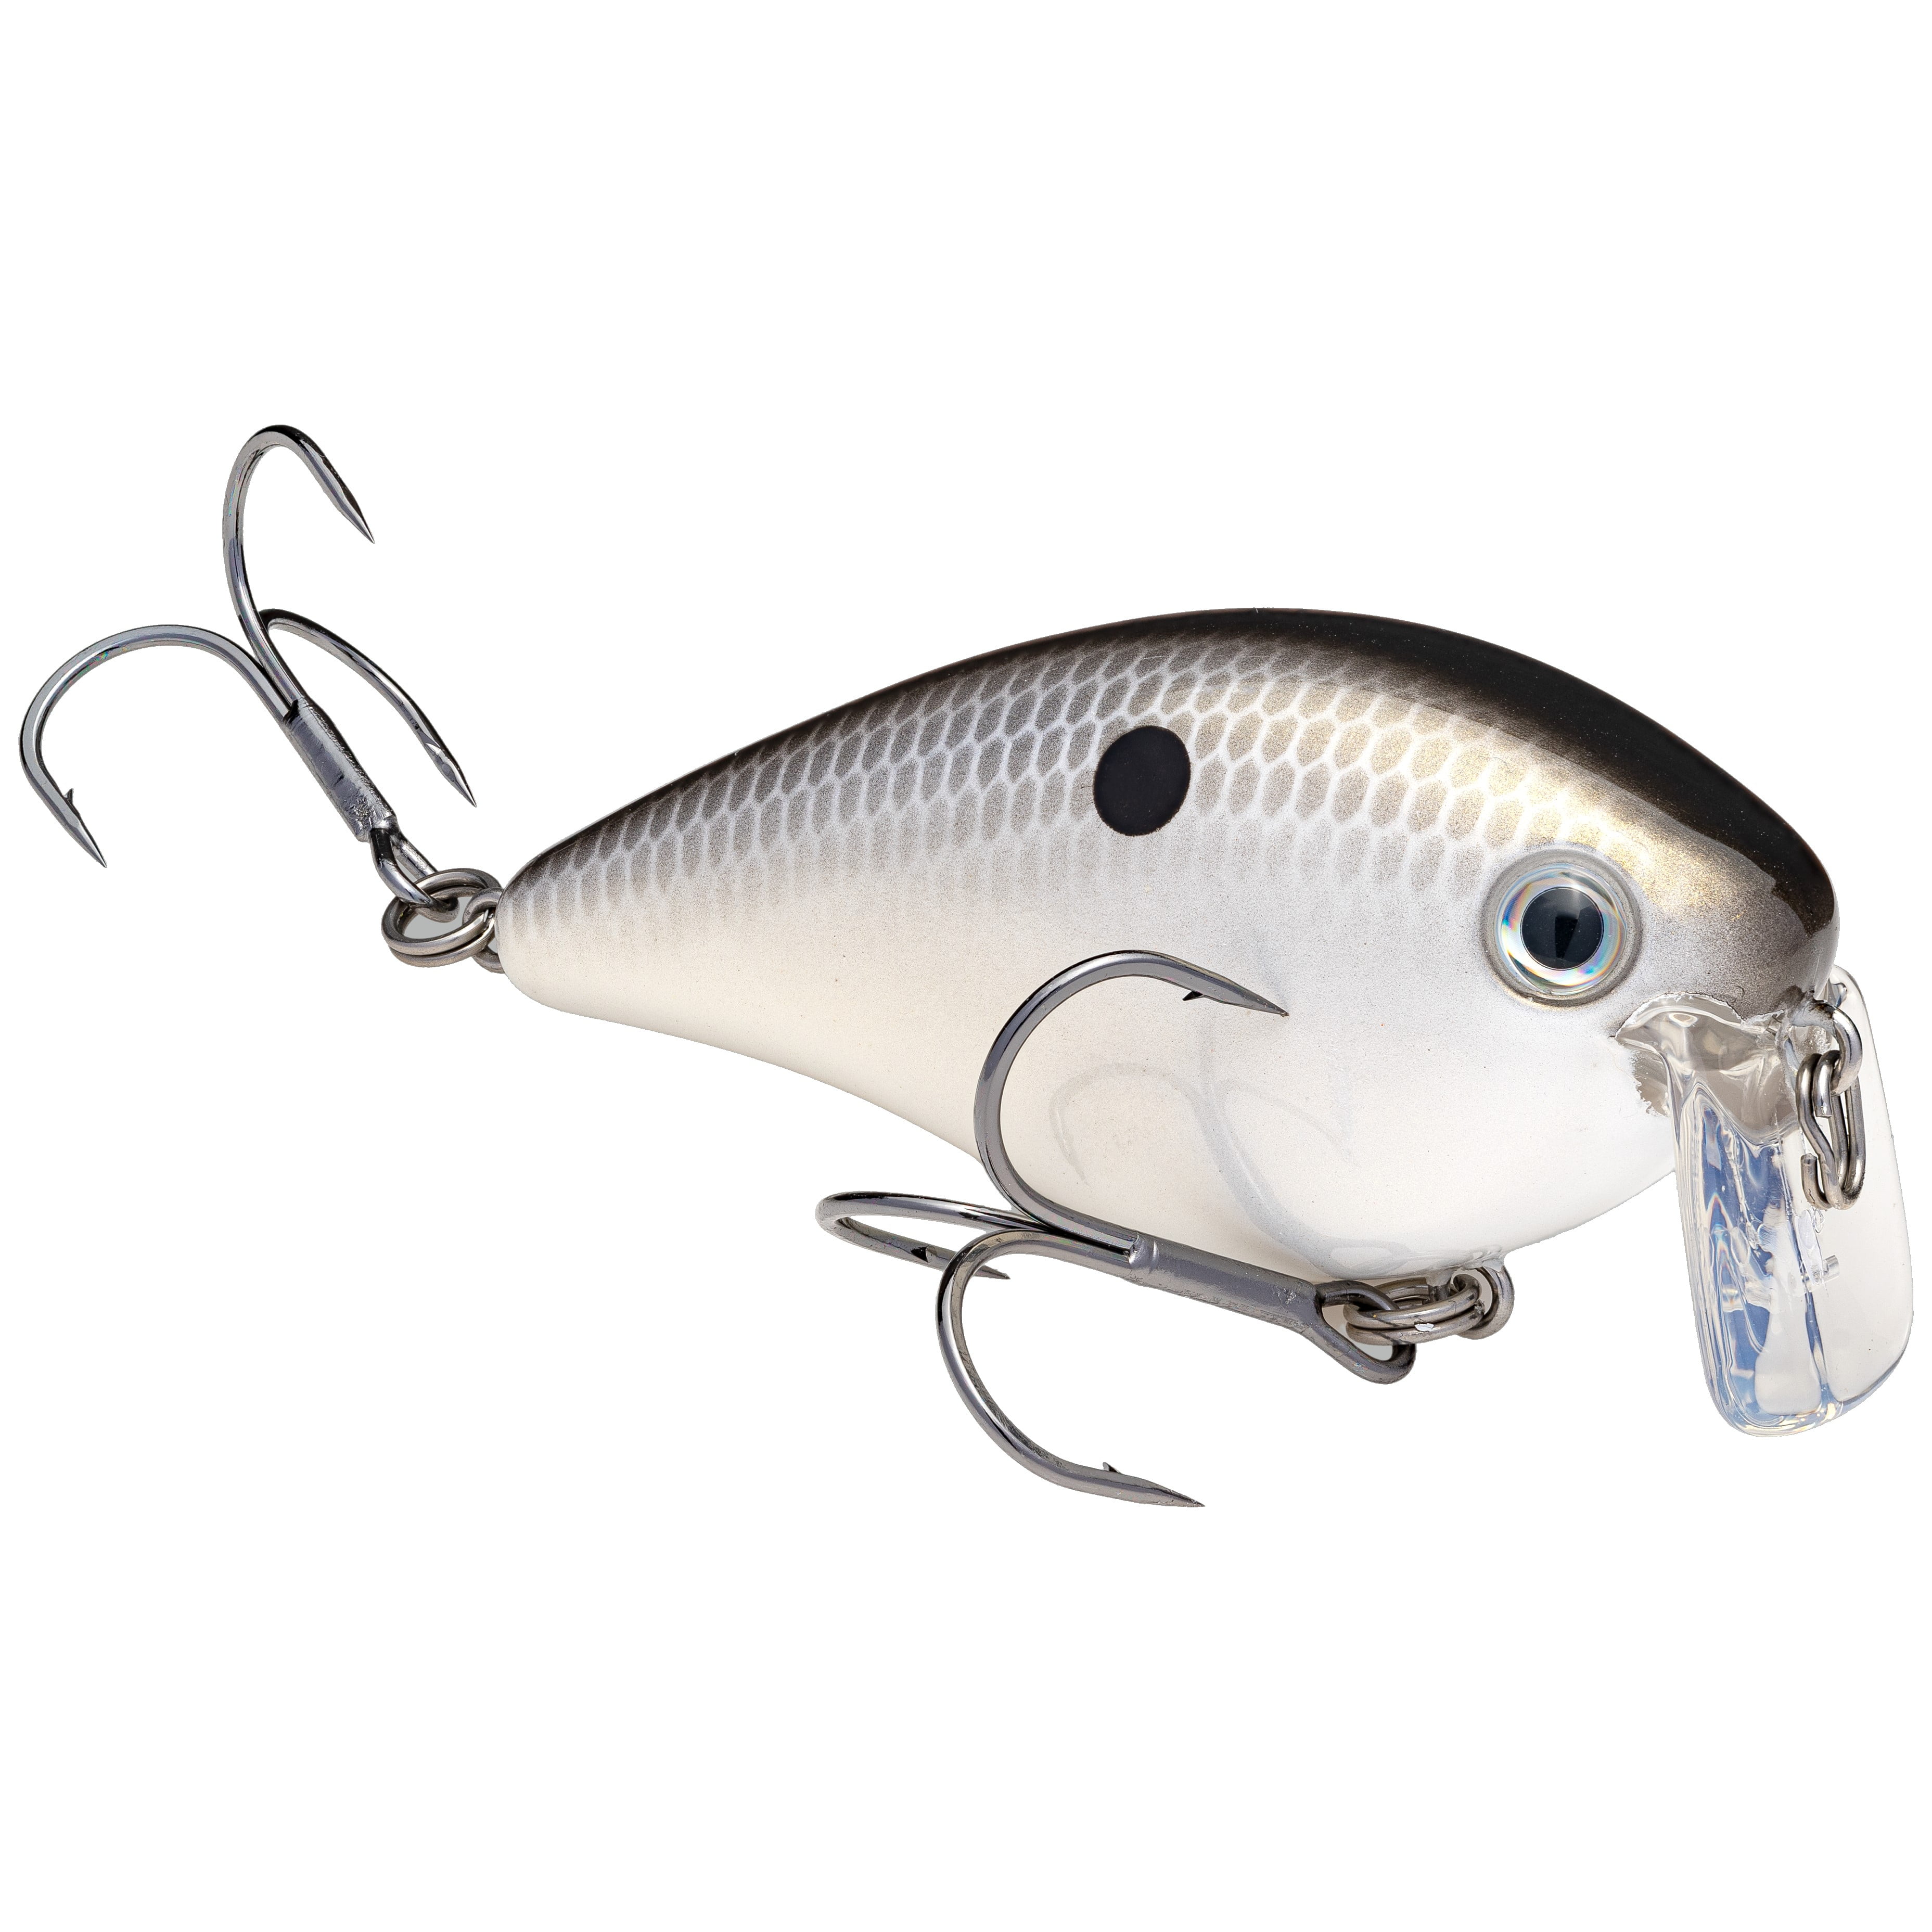 STRIKE KING QUICK CATCH (Cover lots of ground with soft bait lures!) 